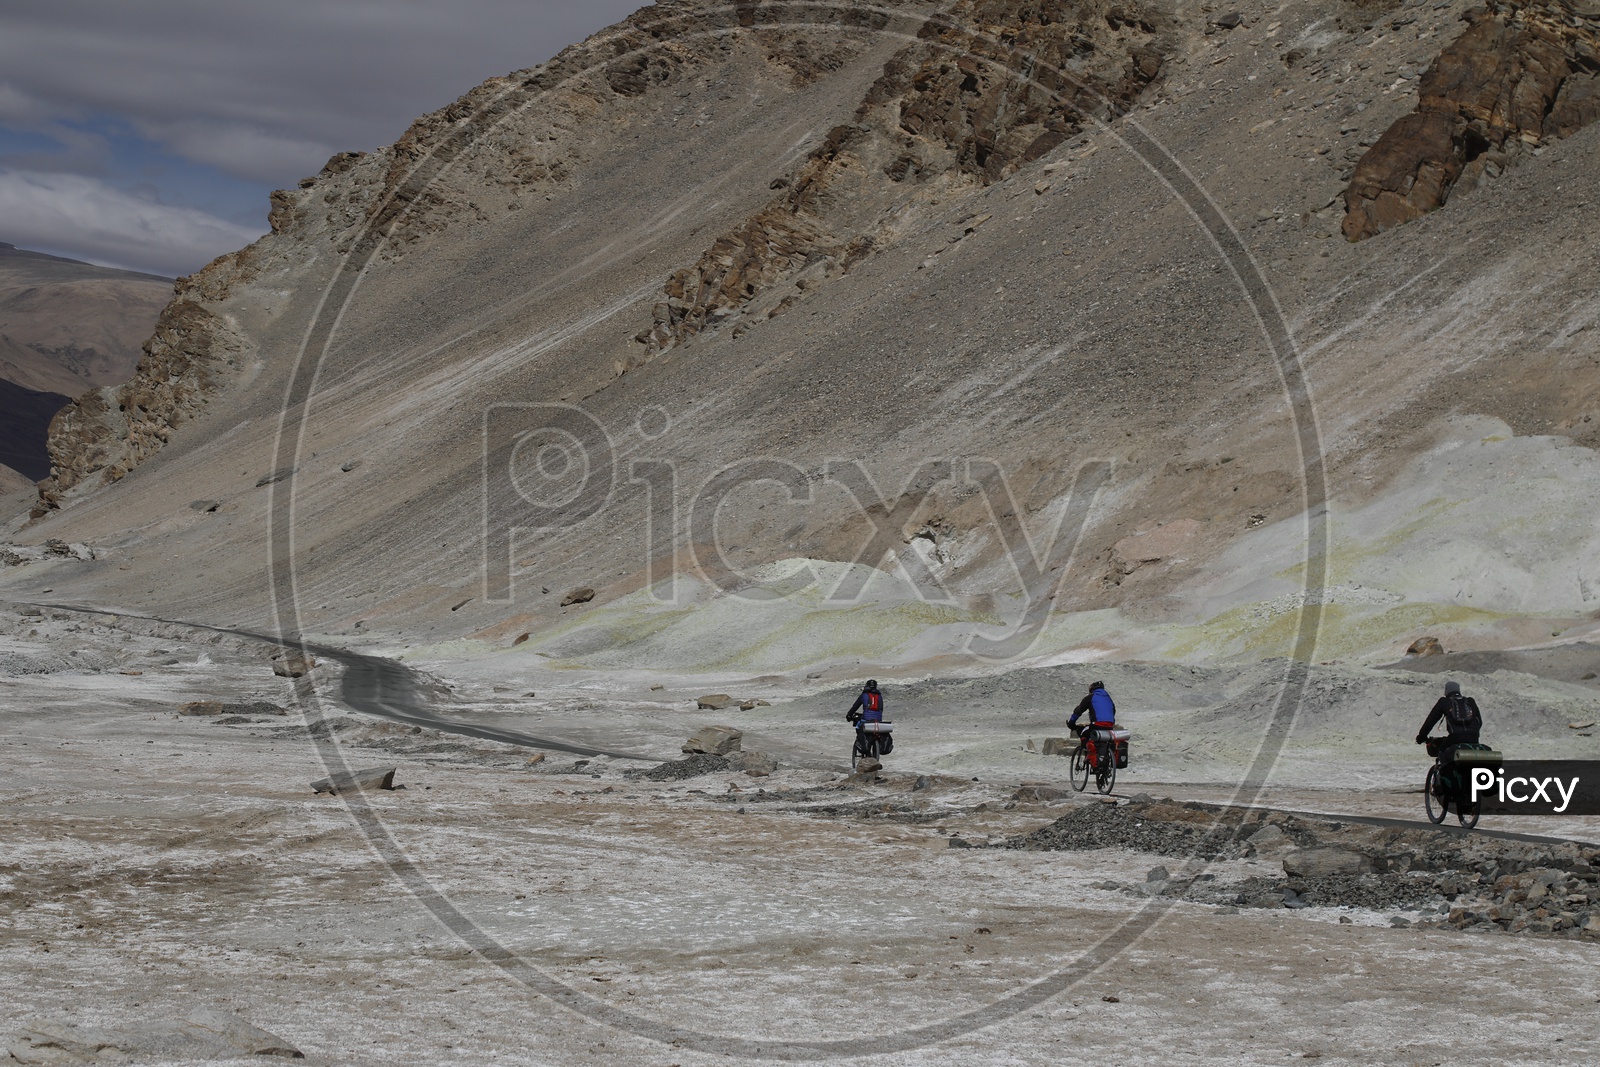 People Commuting by The Cycles On The Roads Of Leh With Sand Dunes in The Background